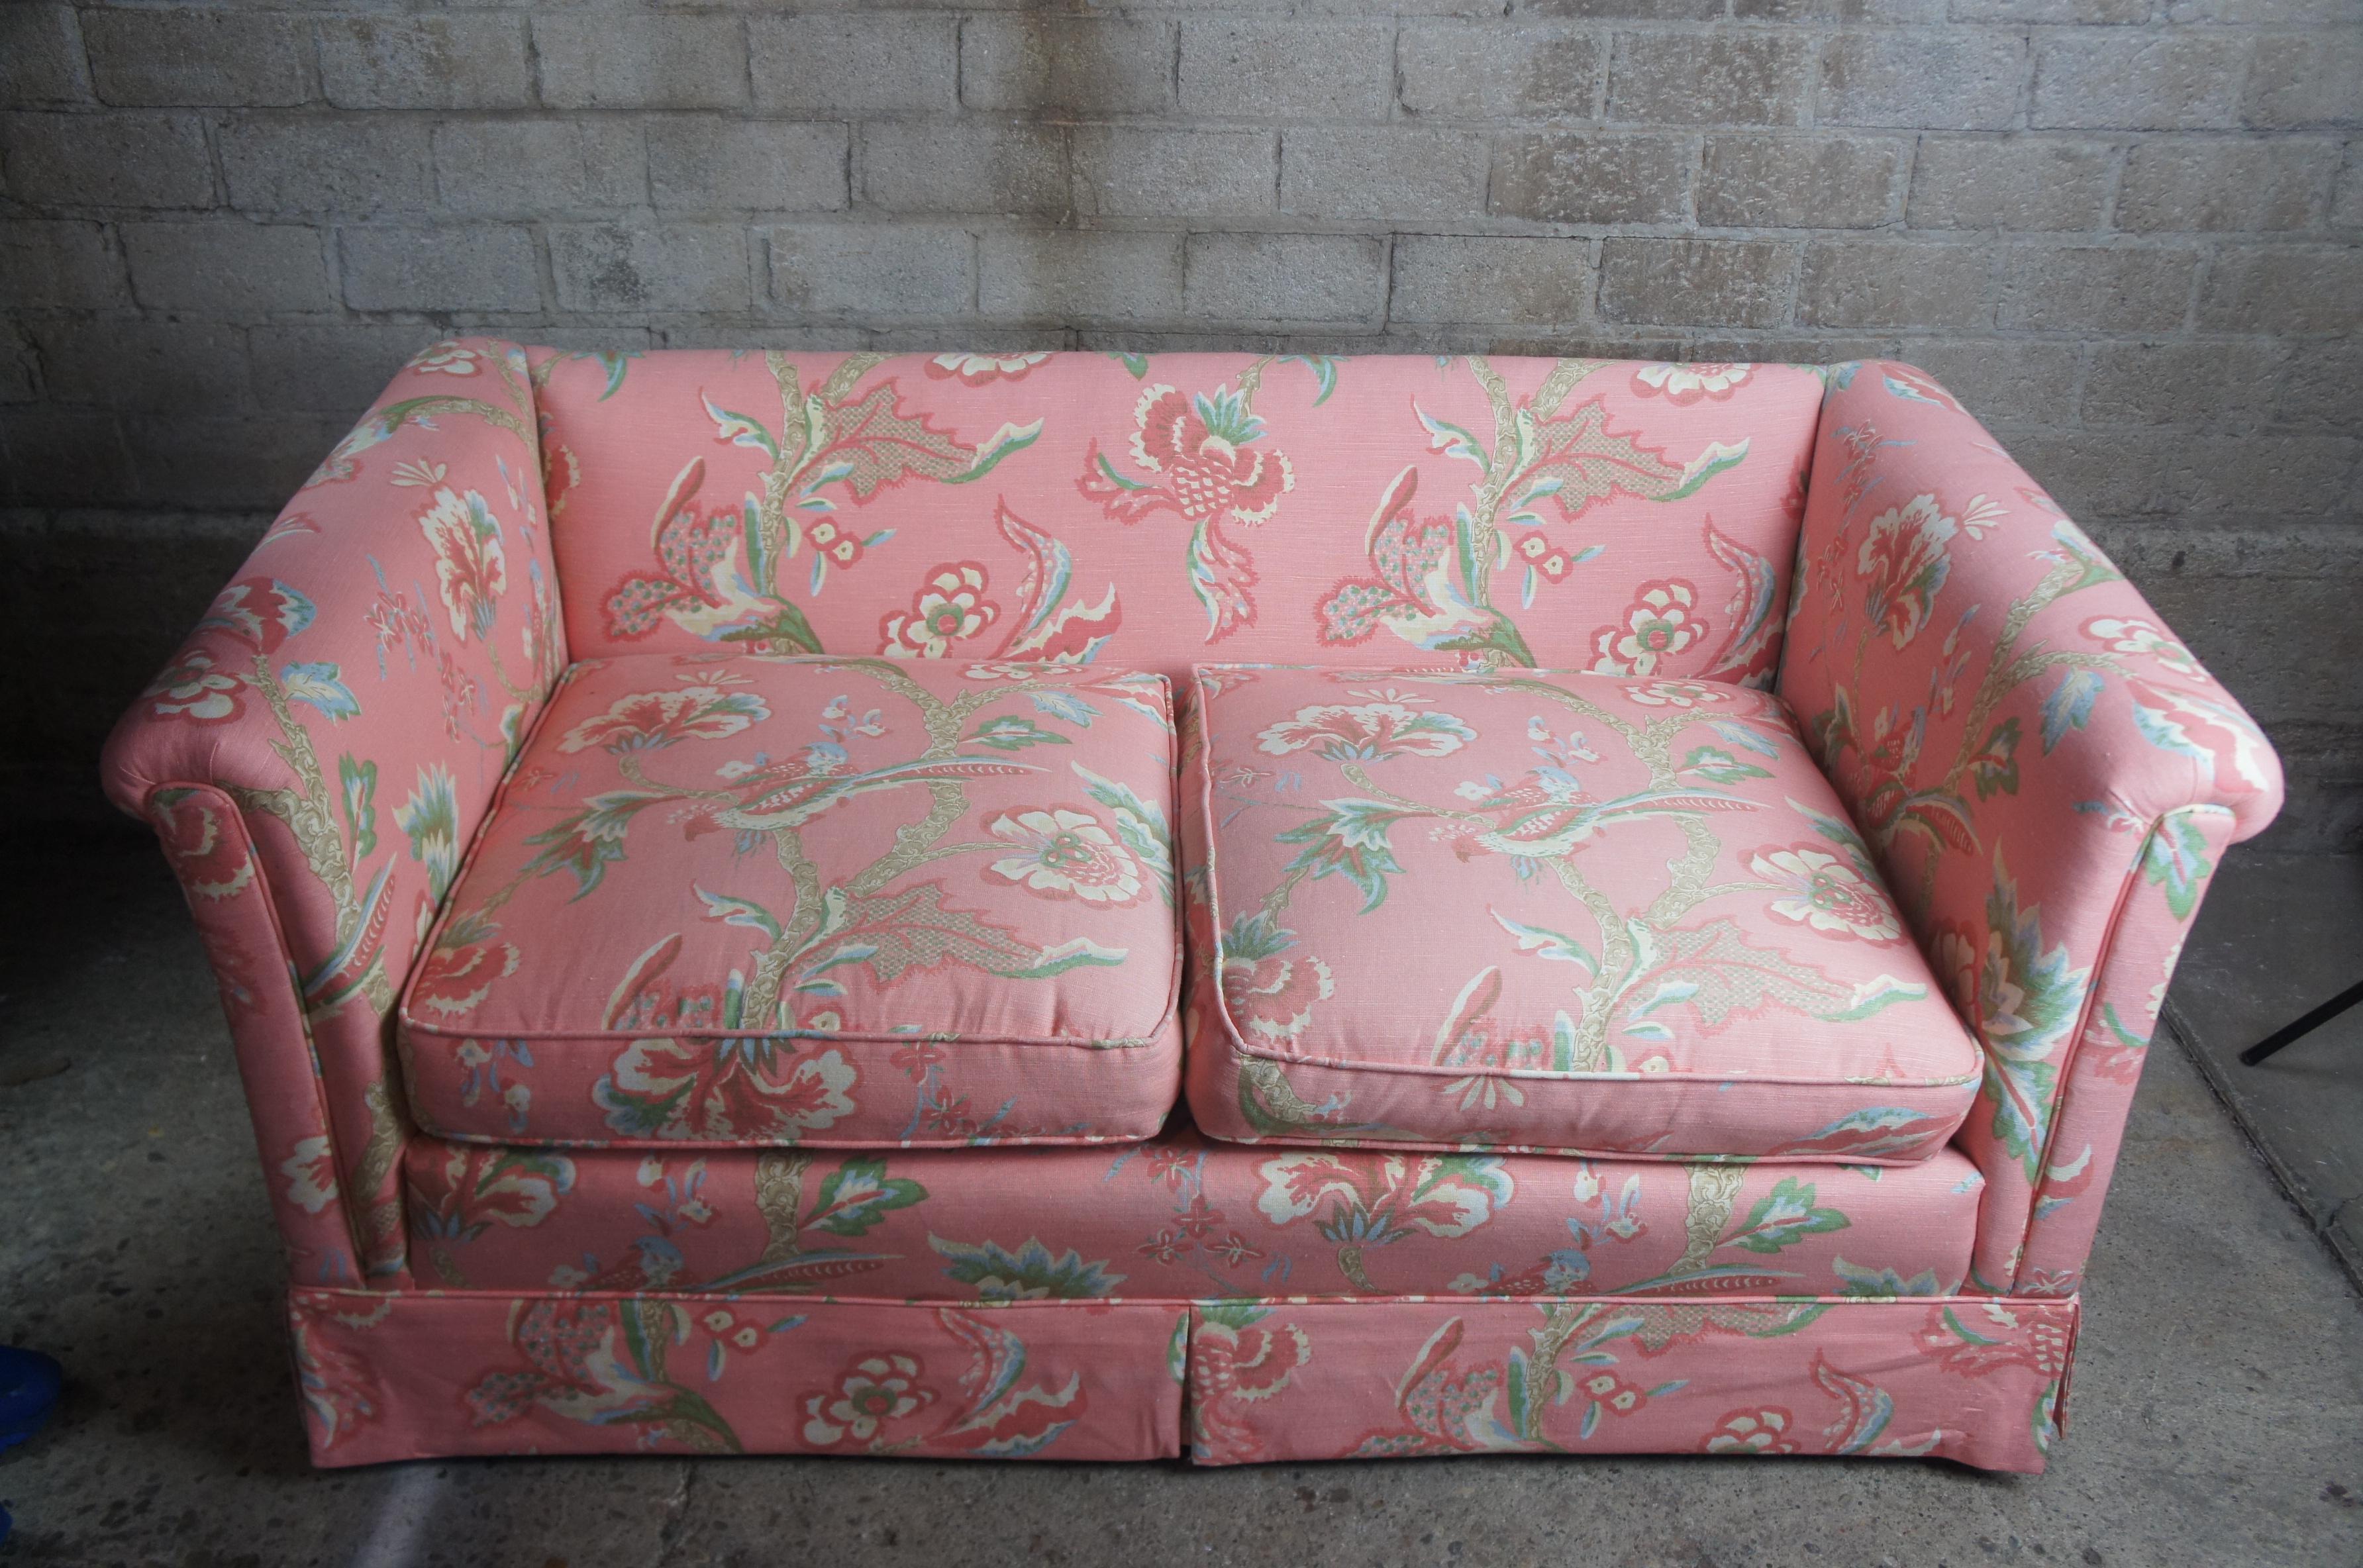 Bohemian Vintage 1970s Boho Chic Tropical Bird Fabric Loveseat Sofa Couch Settee